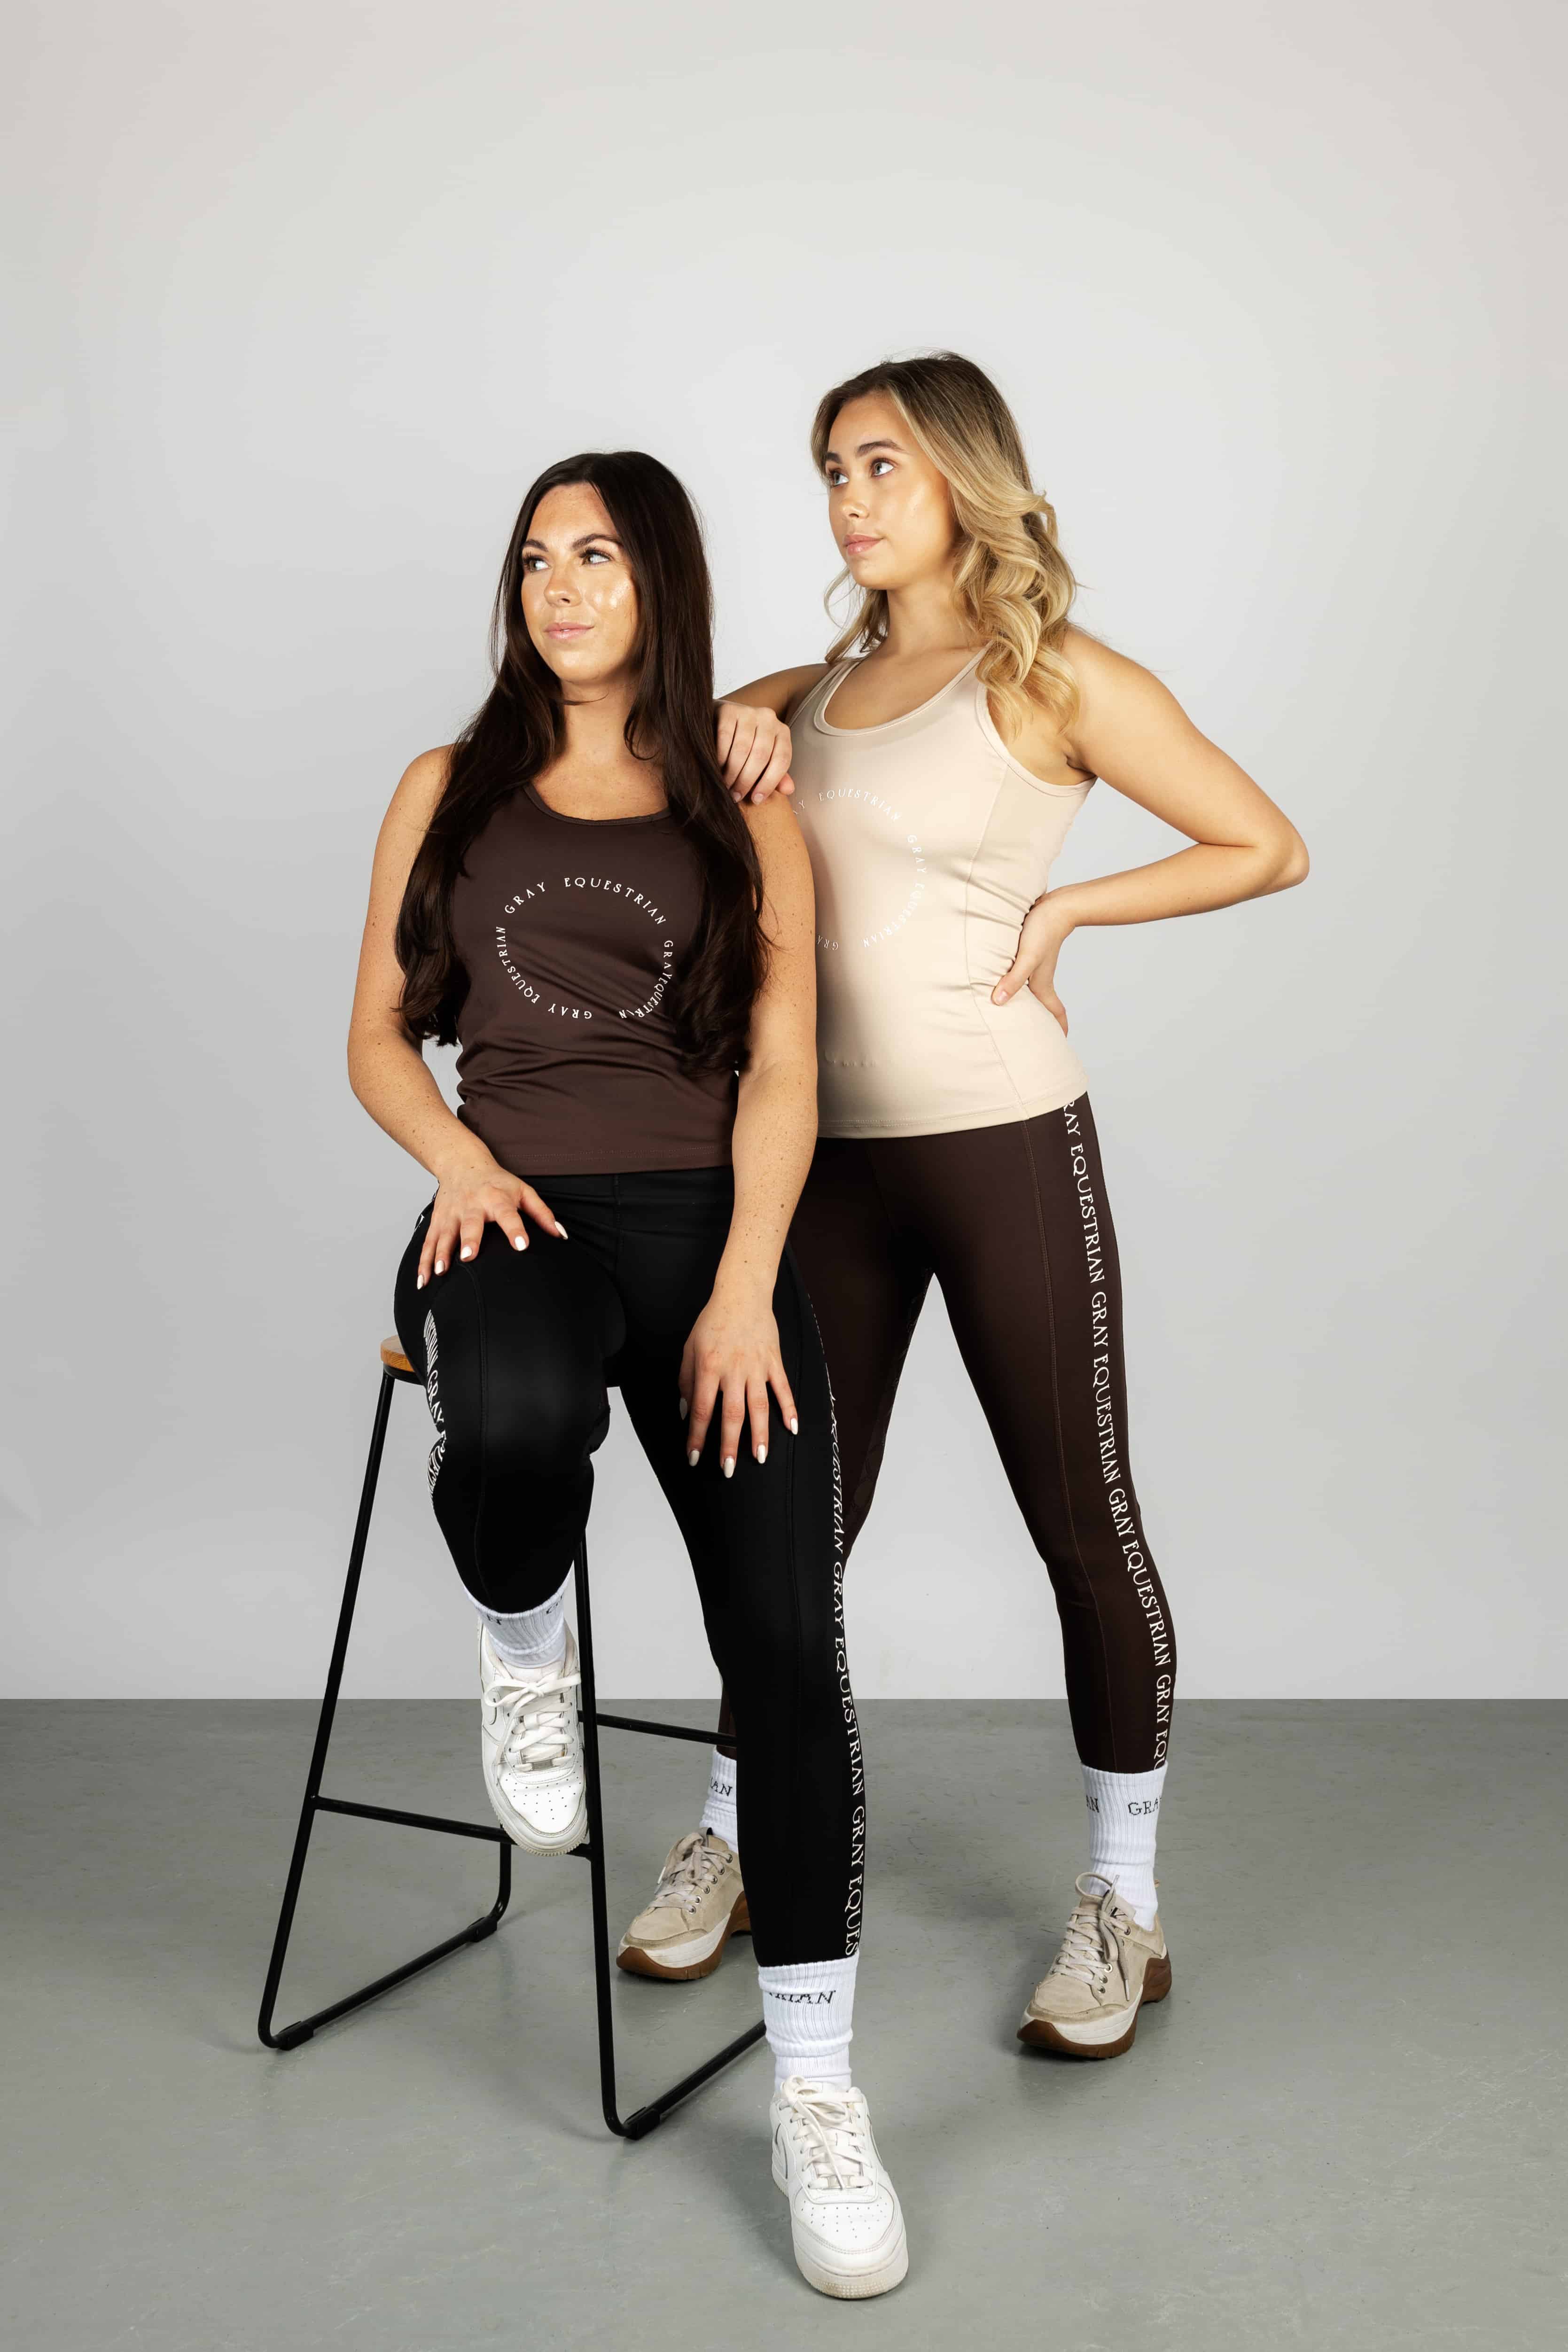 Two models standing next to each other. The model on the left is wearing our brown renew vest and black riding leggings. The model on the right is wearing our nude vest and brown renew leggings.